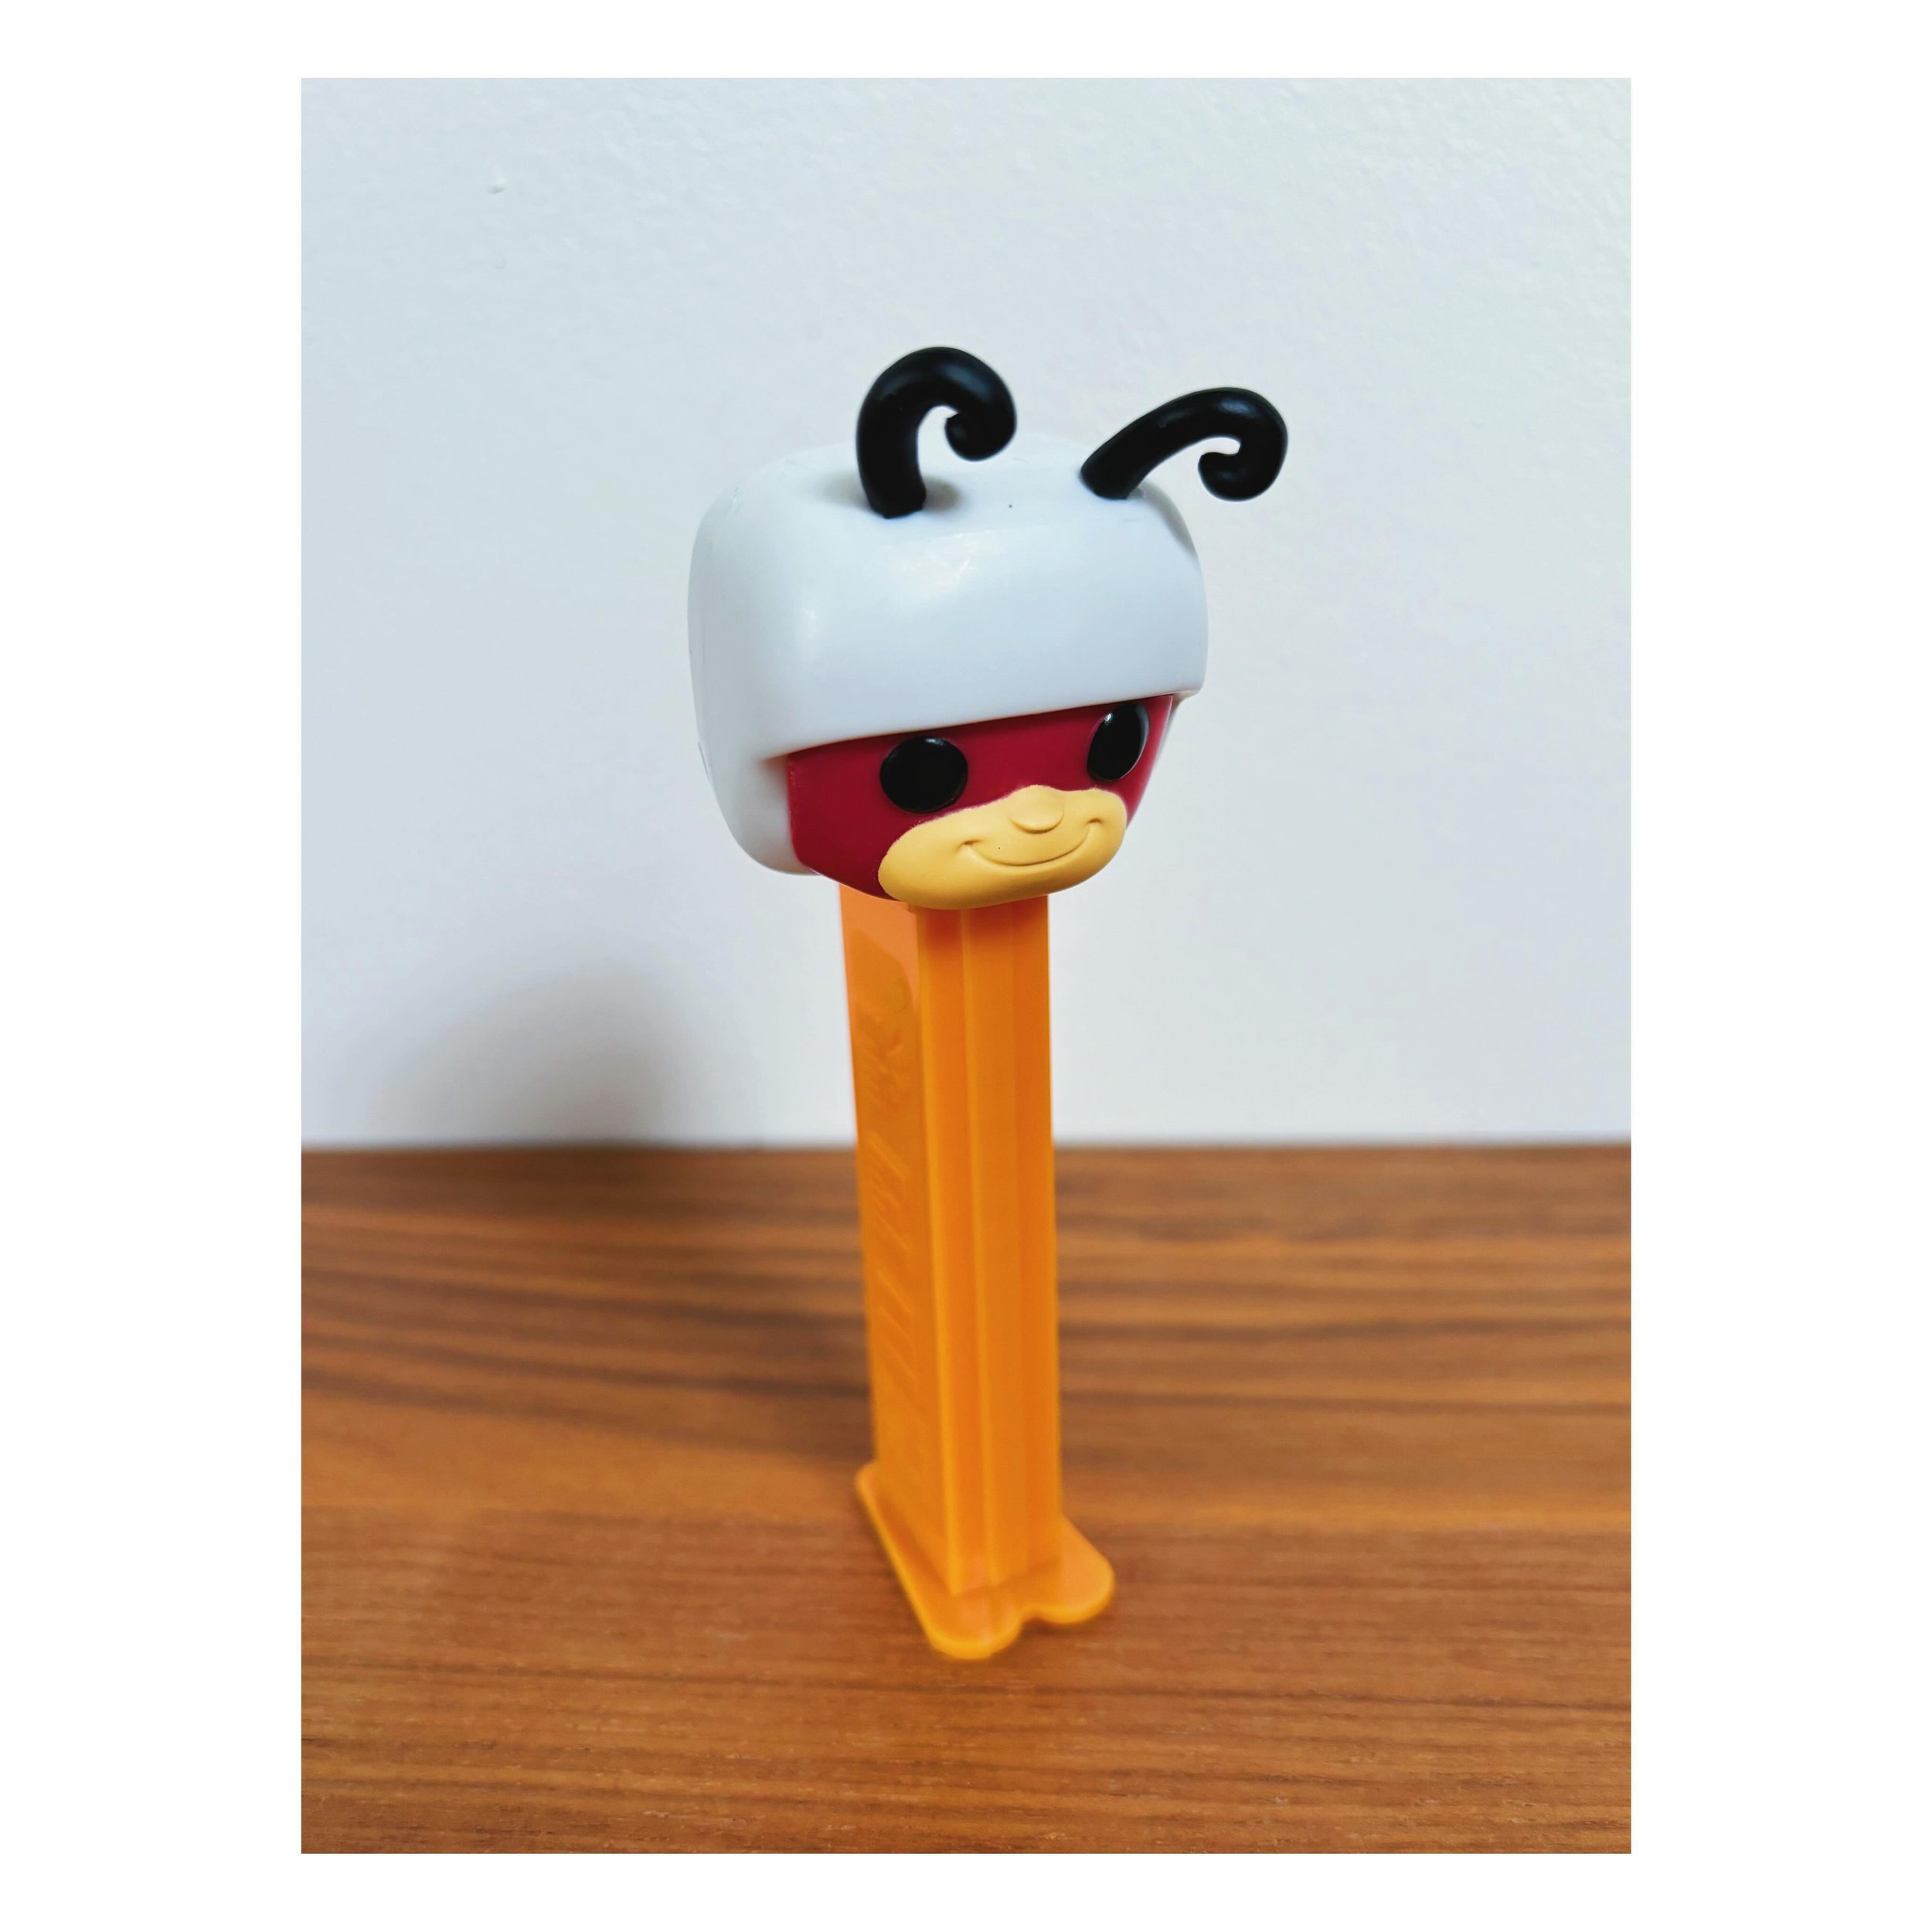 Up and at&rsquo;em 🐜
.
.
#pez #pezdispenser #candy #atomant